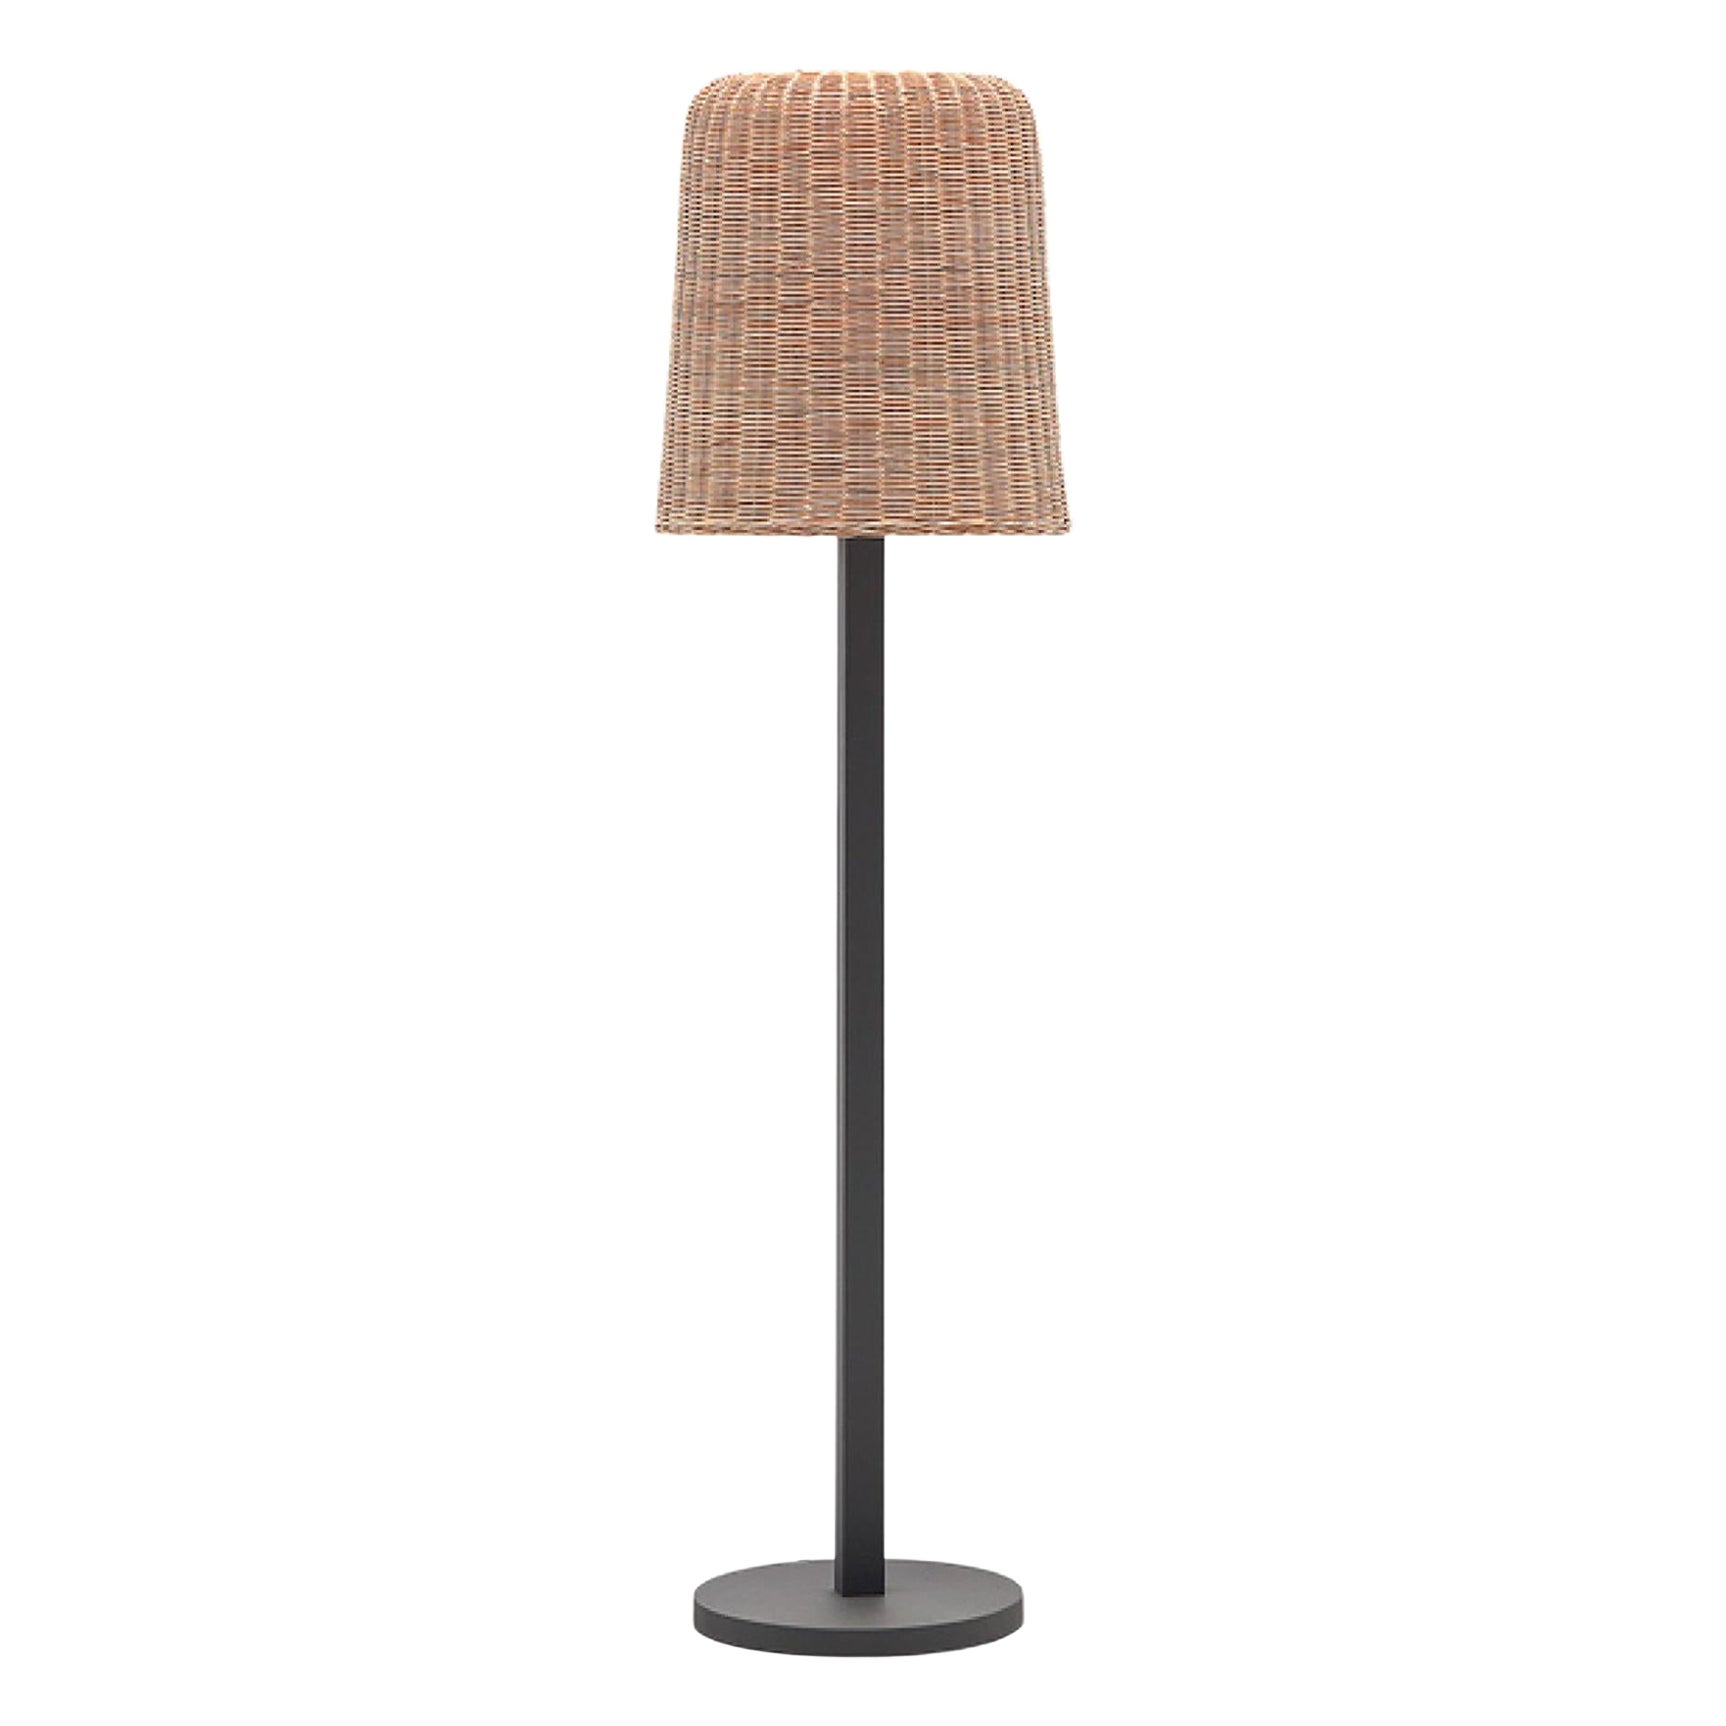 Gervasoni Floor Lamp in Black Lacquer with Rattan Core Shade by Paola Navone For Sale